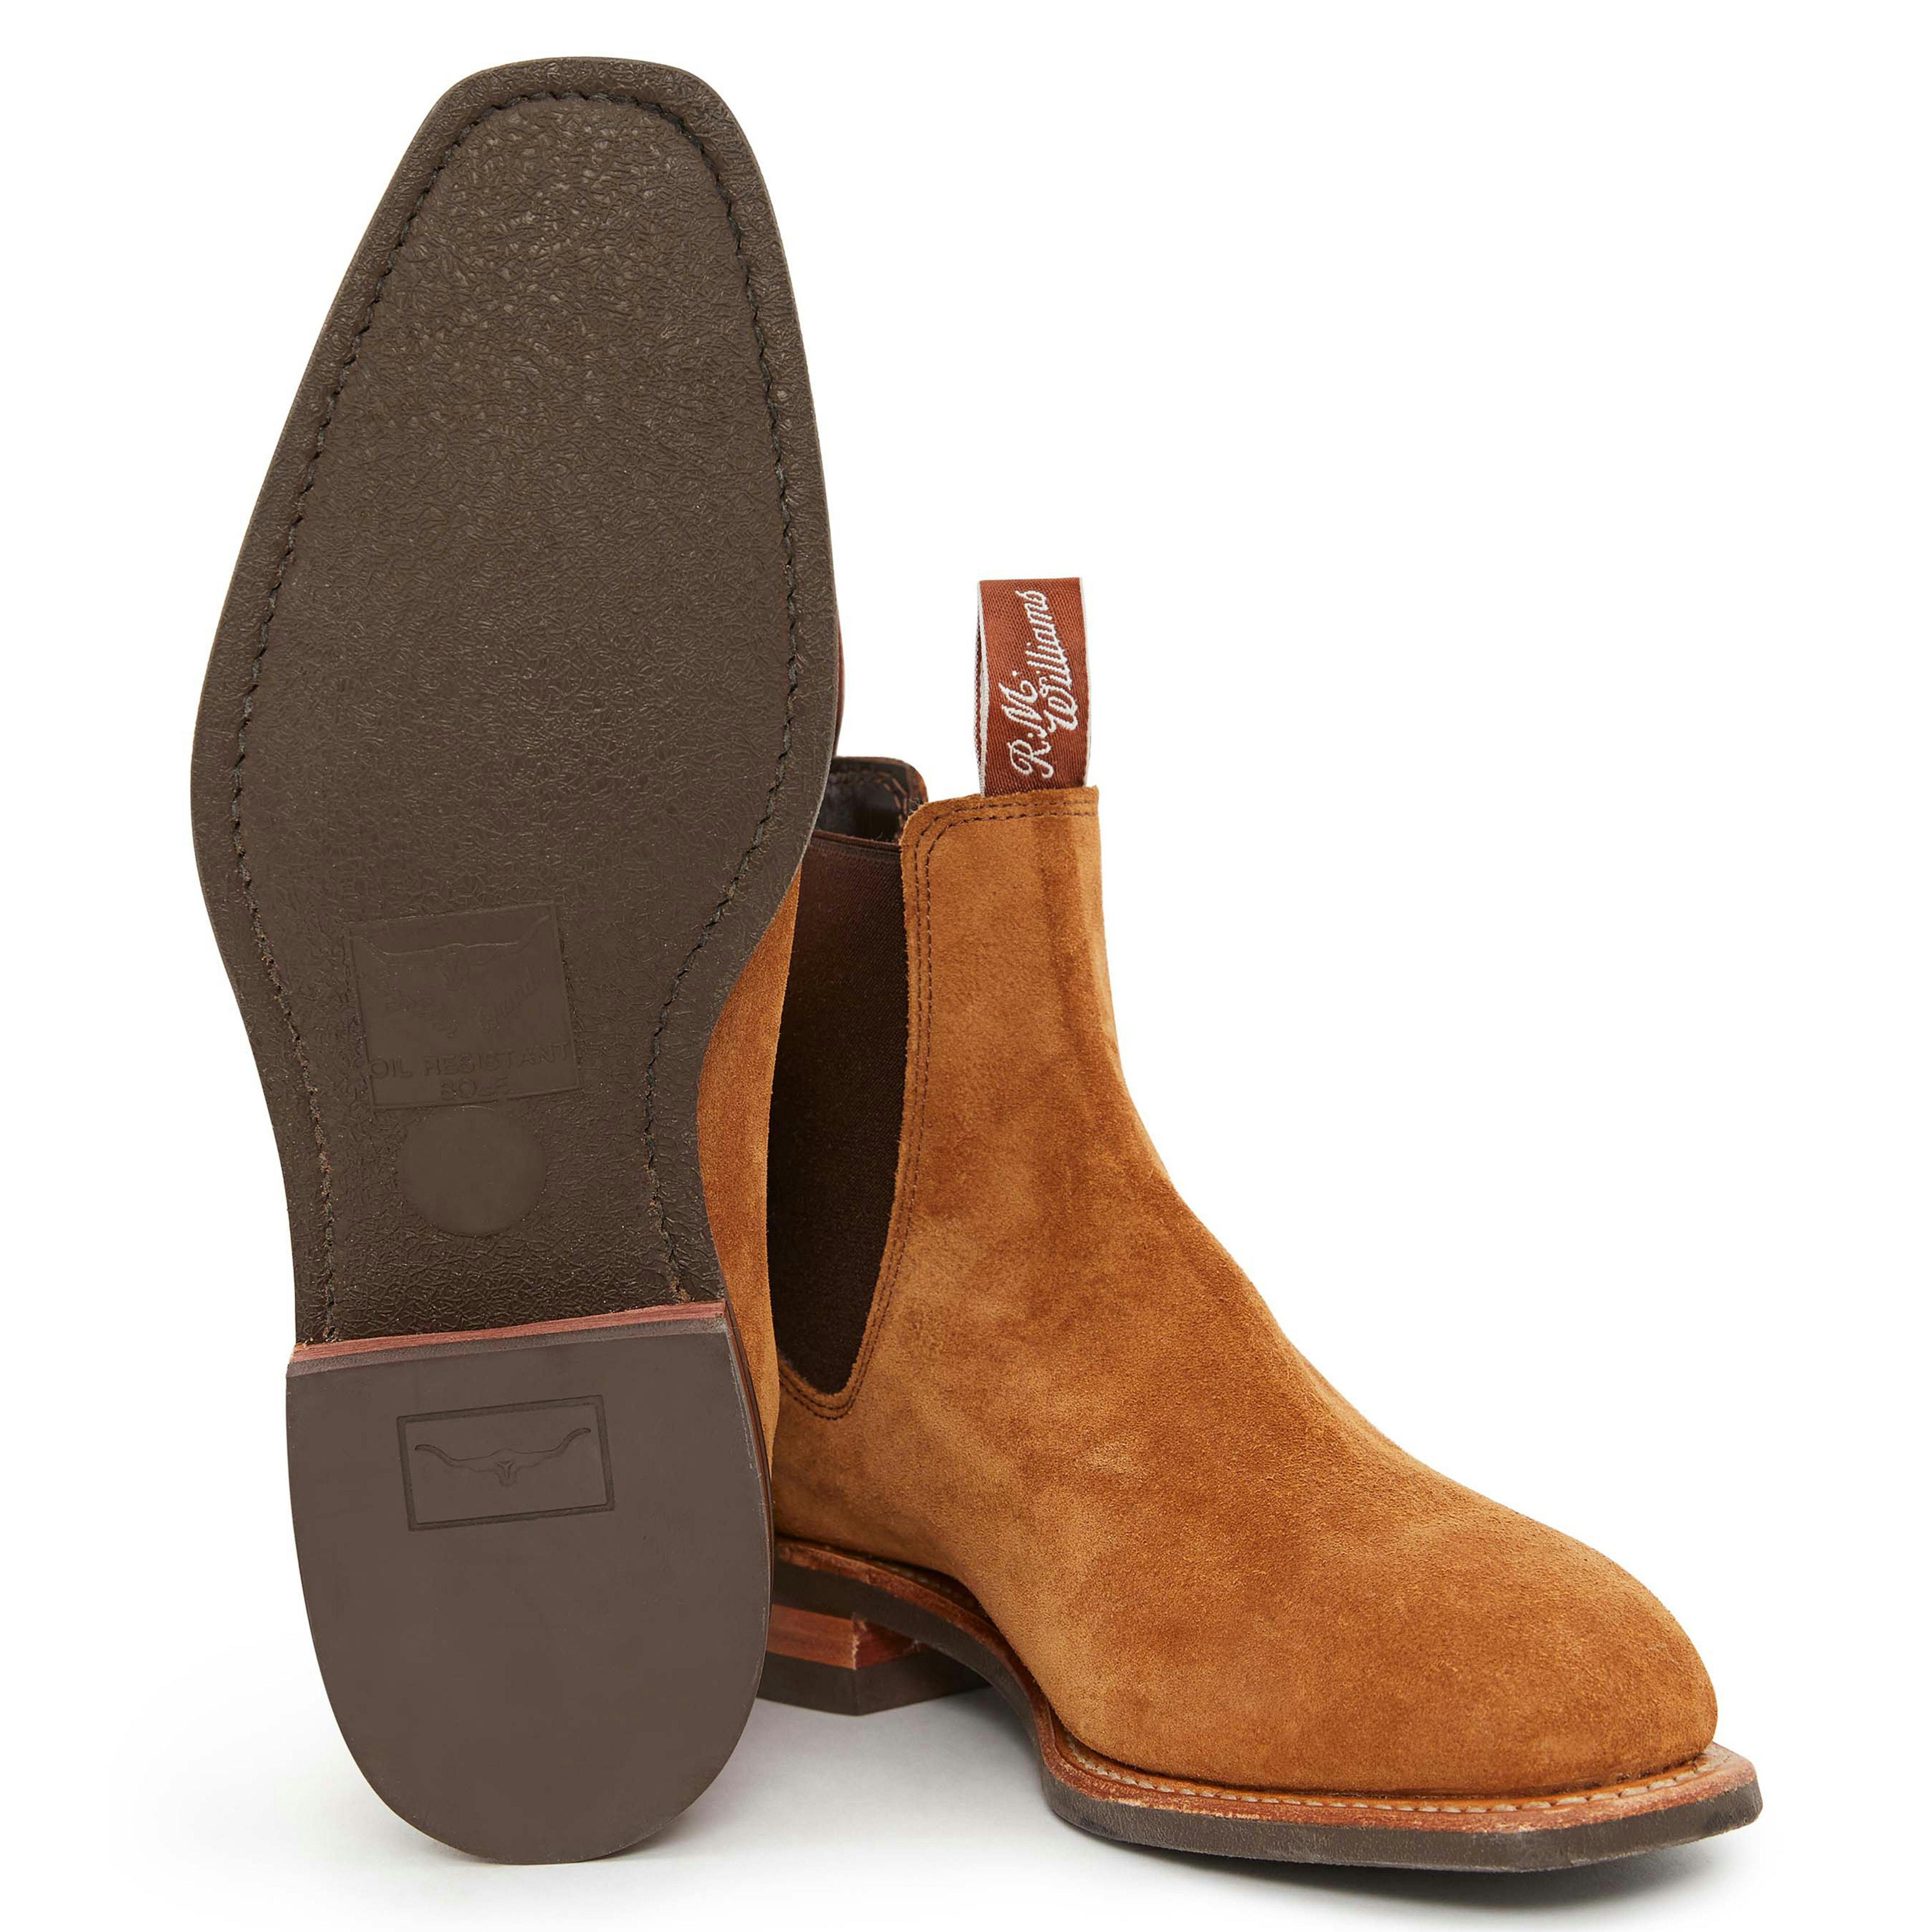 RM Williams Exclusive Suede Comfort Craftsman Boots - Mens from Humes  Outfitters